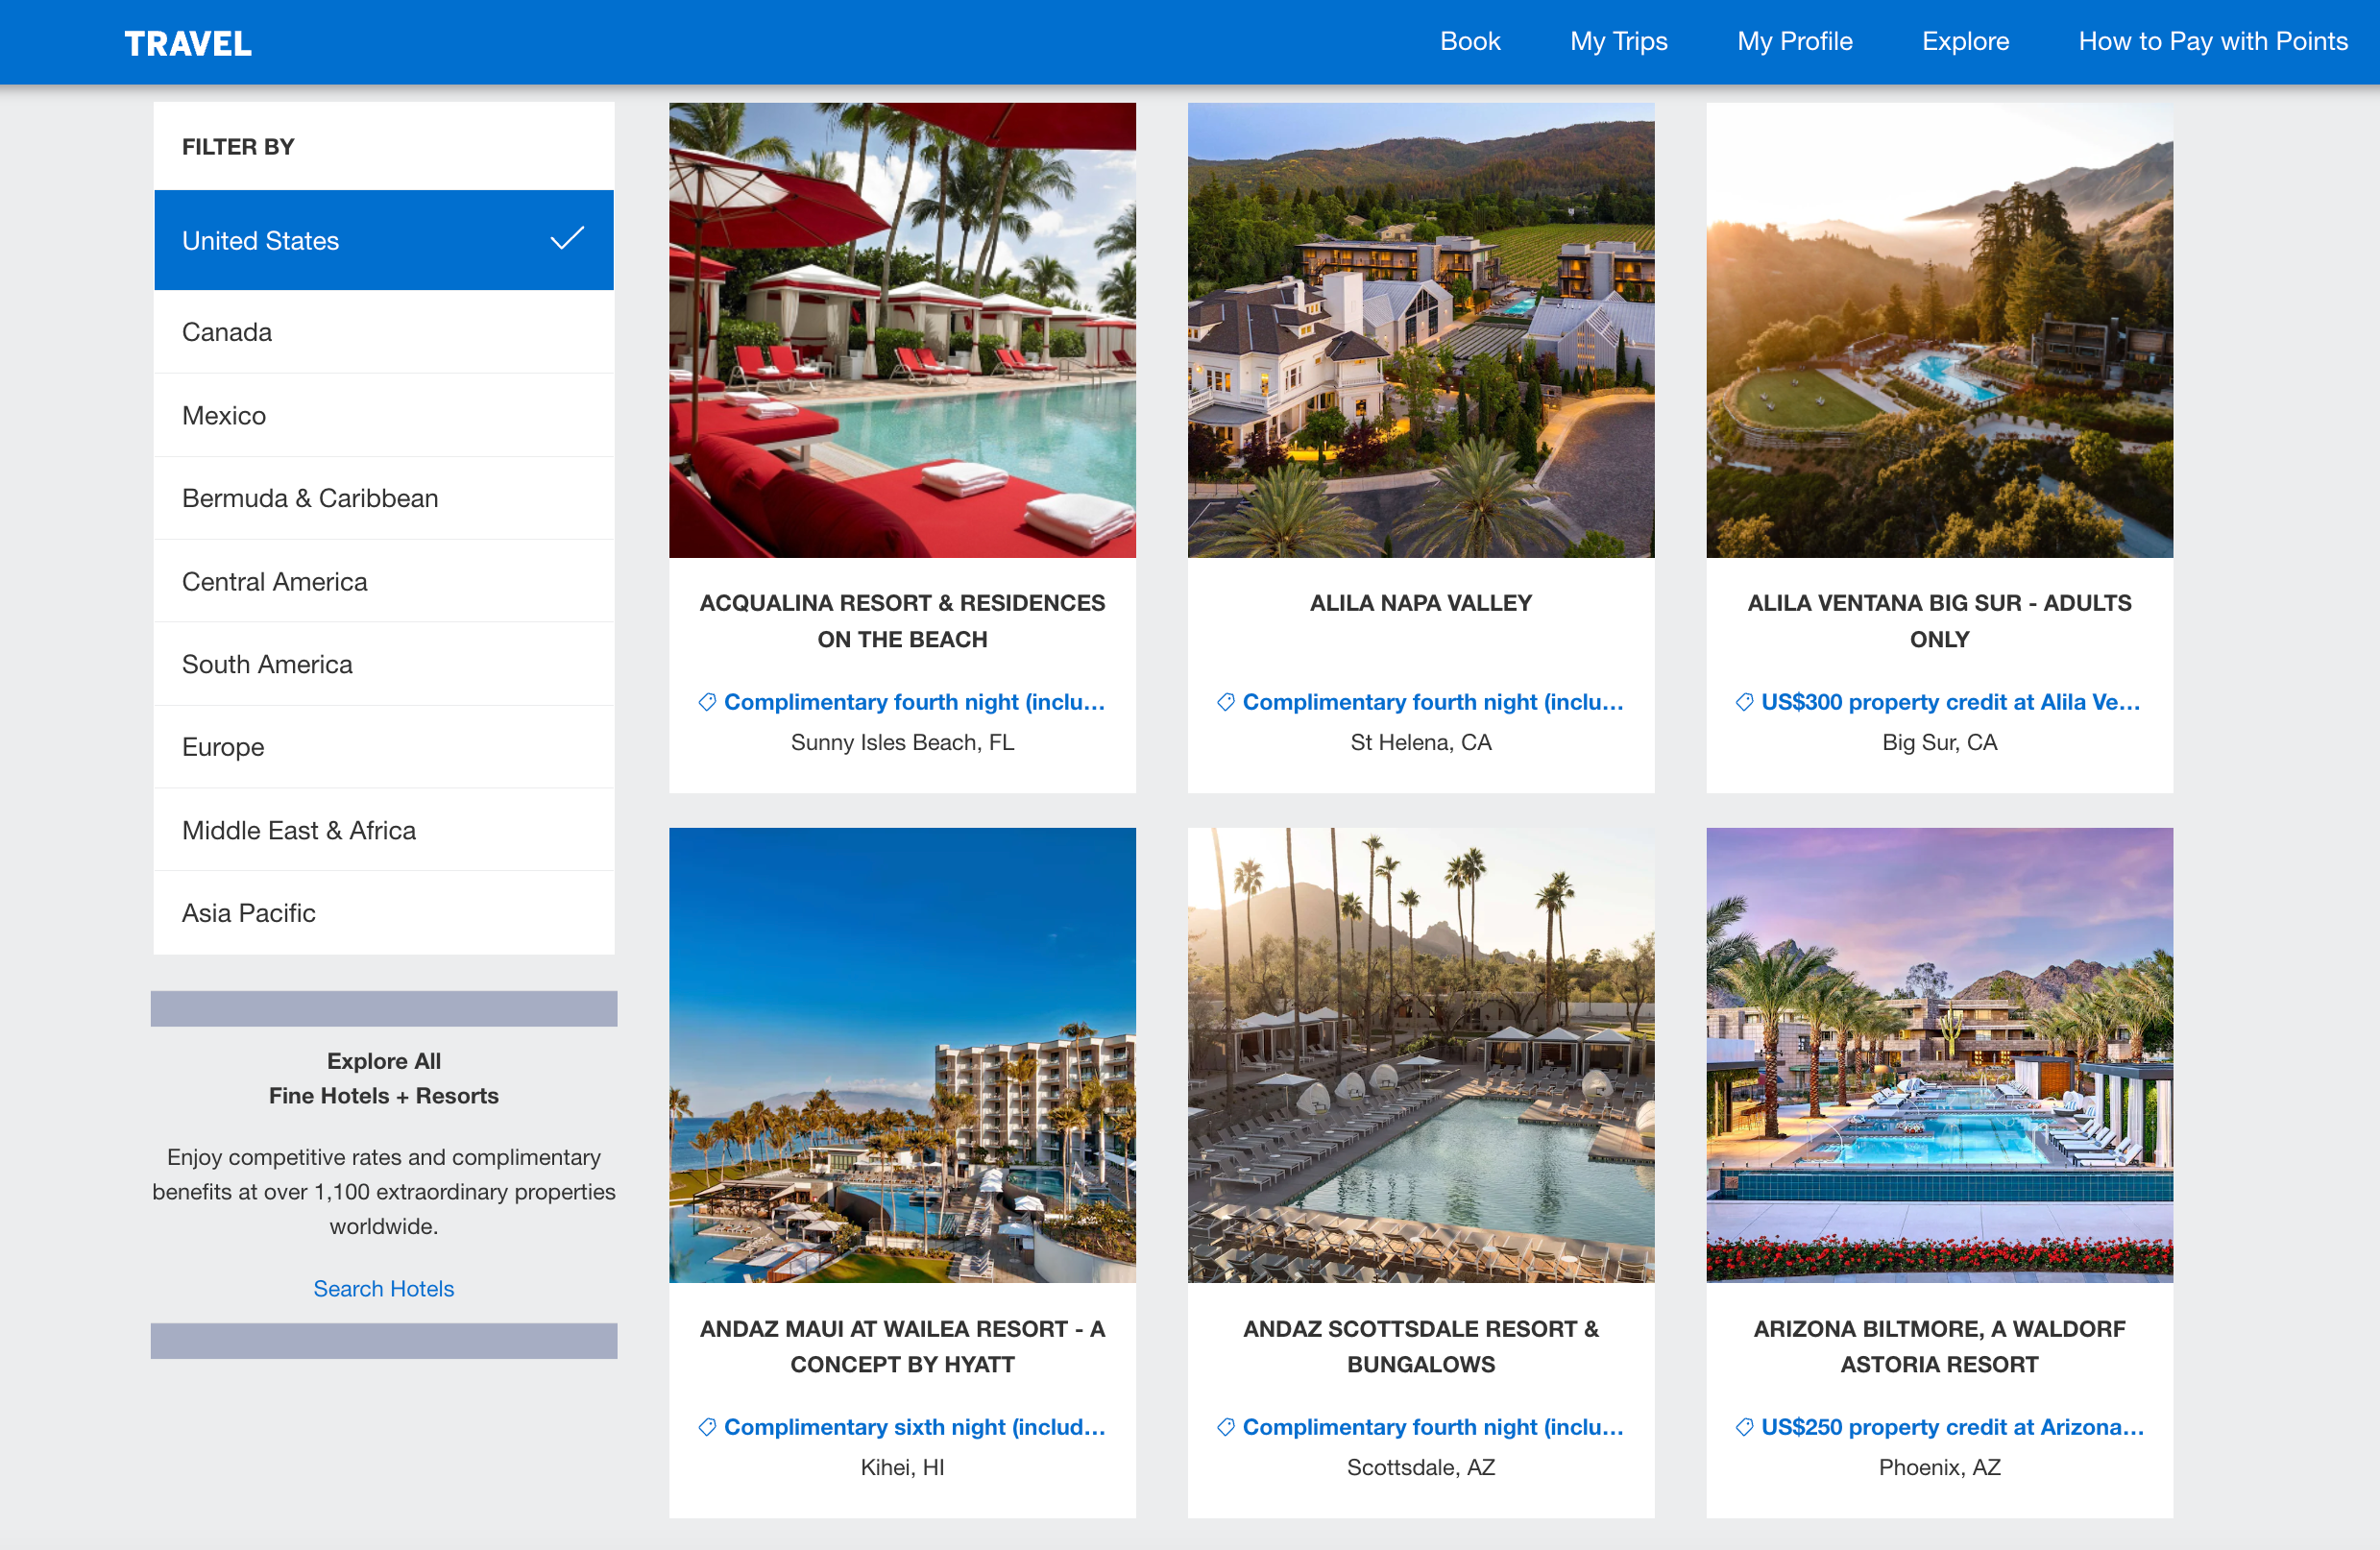 American Express Fine Hotels and Resorts offering complimentary nights as of July 1, 2022